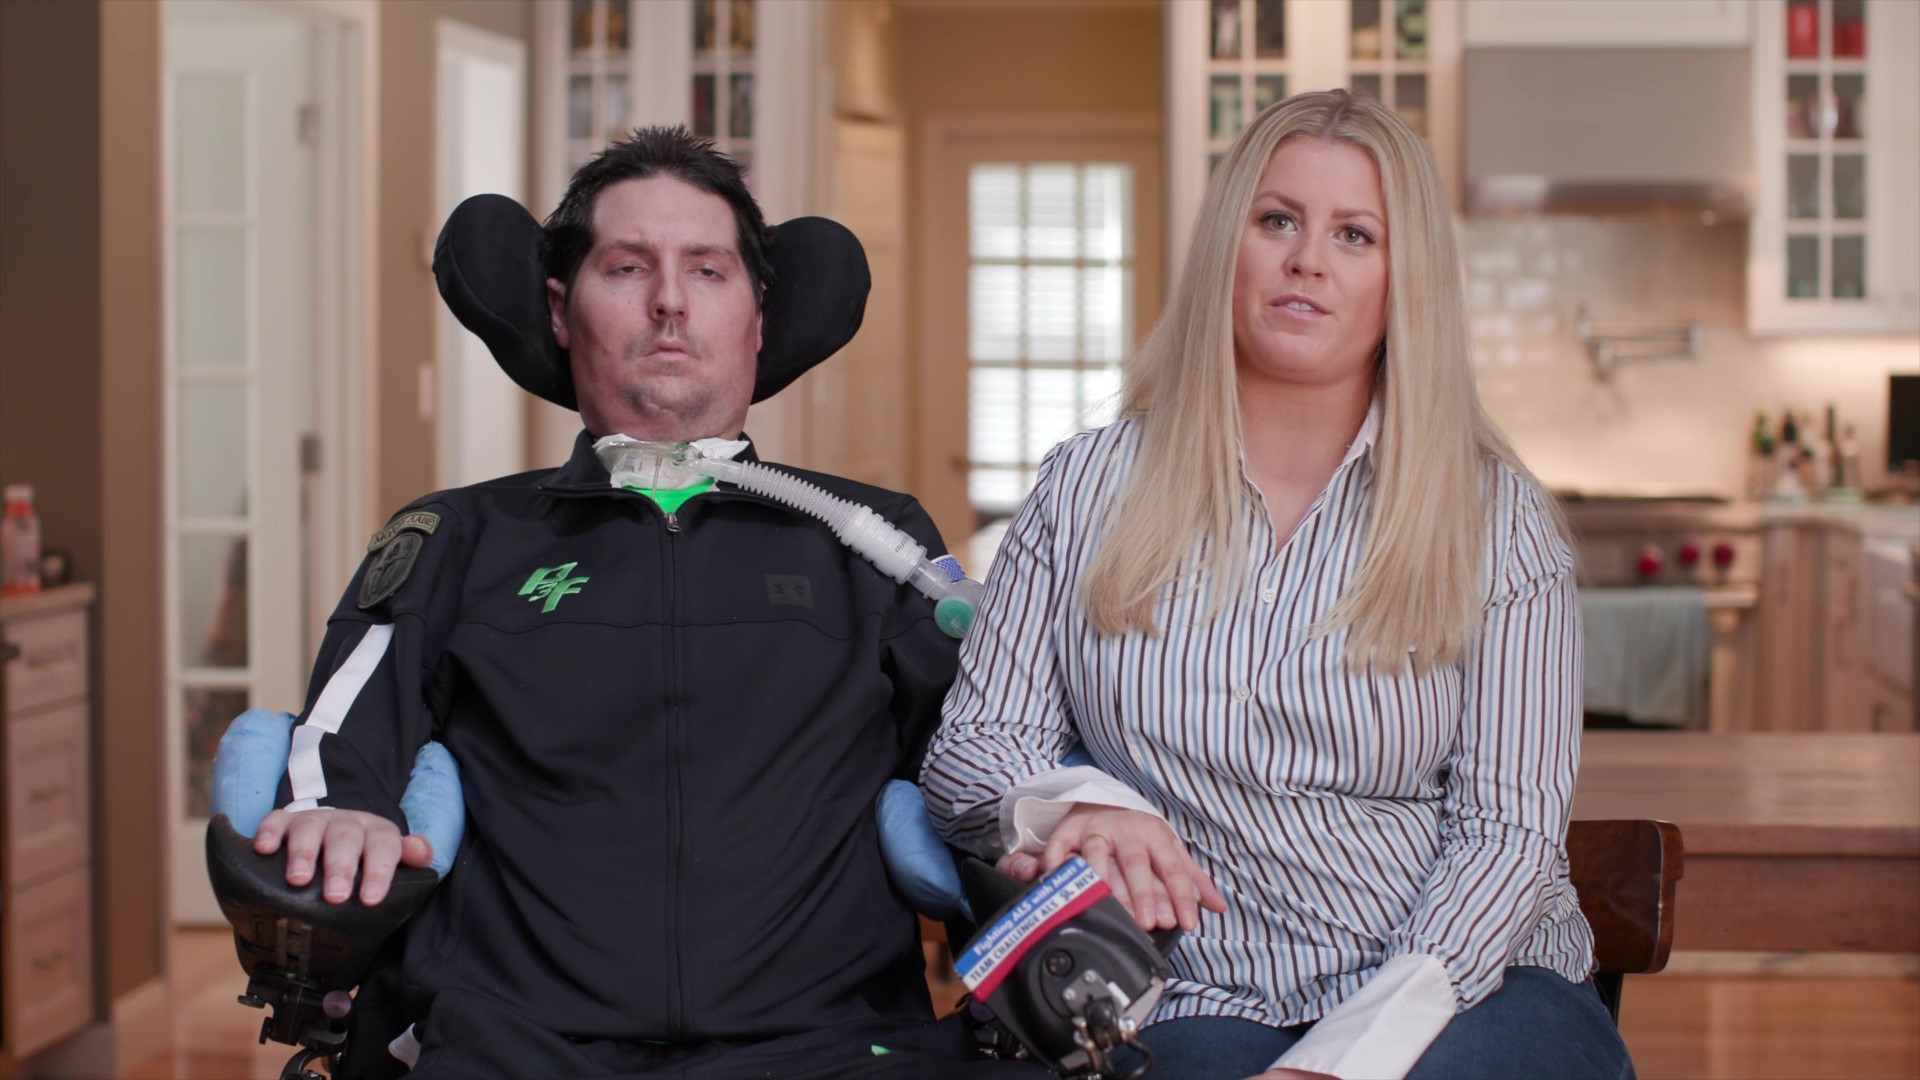 Founders of ALS Ice Bucket Challenge and The ALS Association Launch 'Challenge Me' Campaign to Mark Fifth Anniversary of Biggest Medical Movement in History